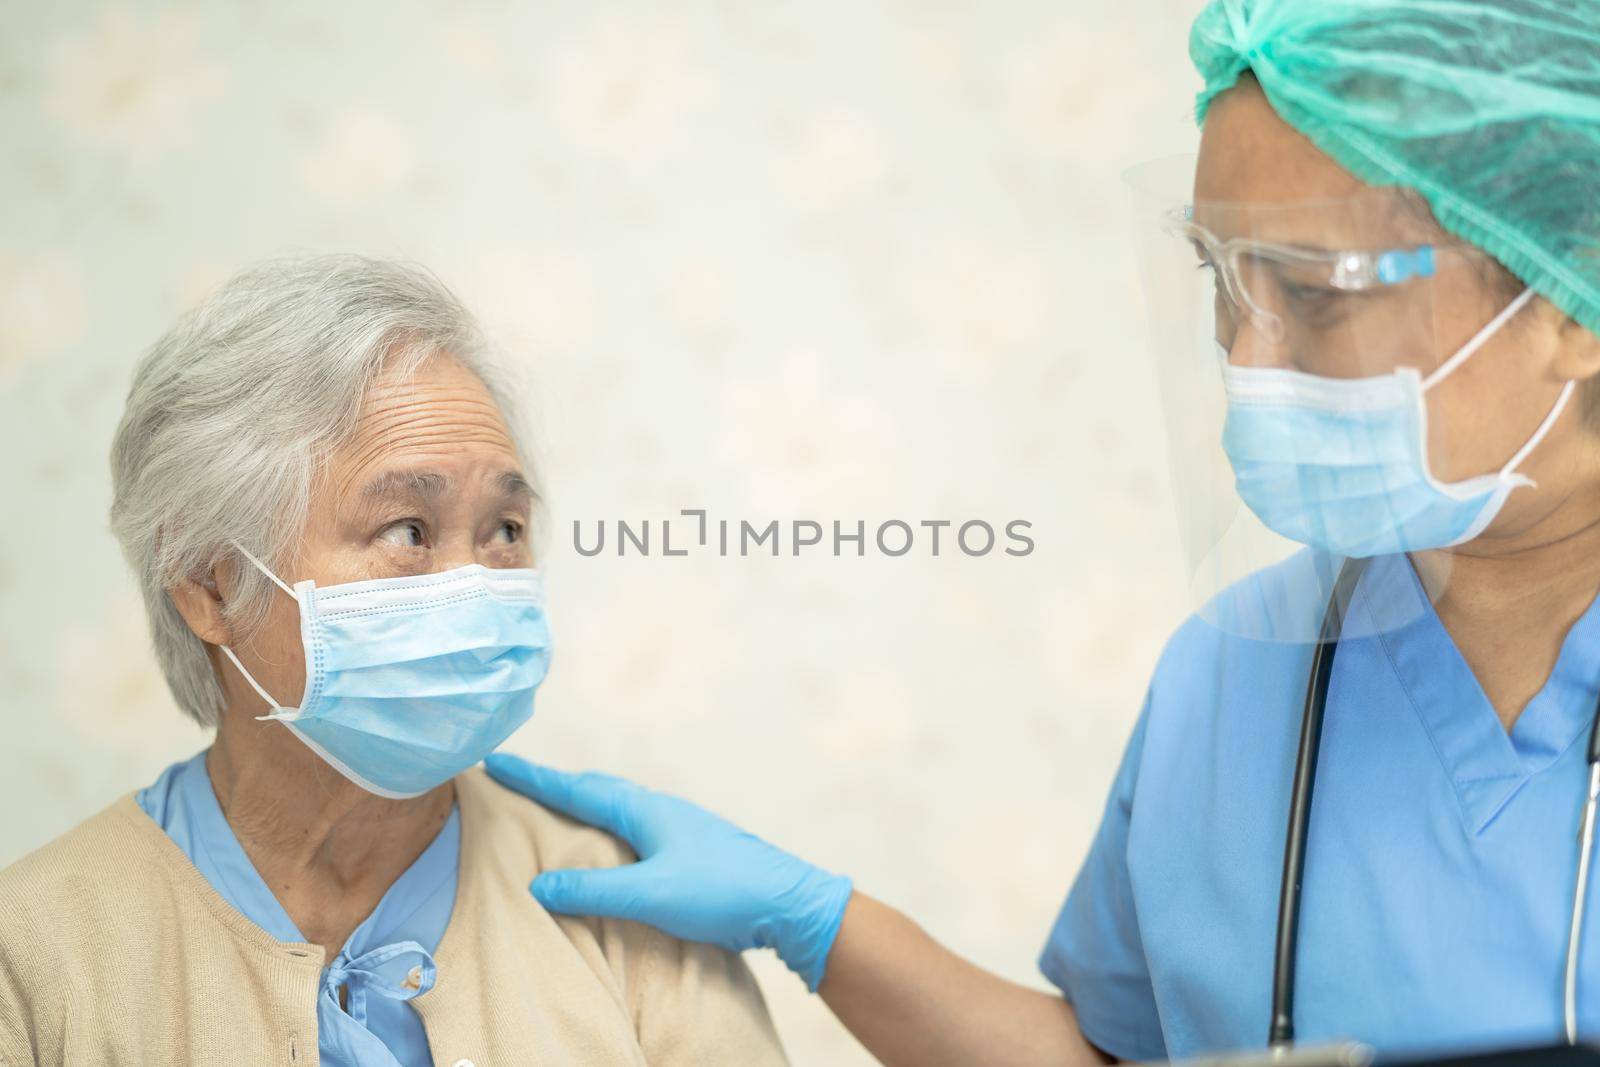 Doctor using stethoscope to checking Asian senior or elderly old lady woman patient wearing a face mask in hospital for protect infection Covid-19 Coronavirus.